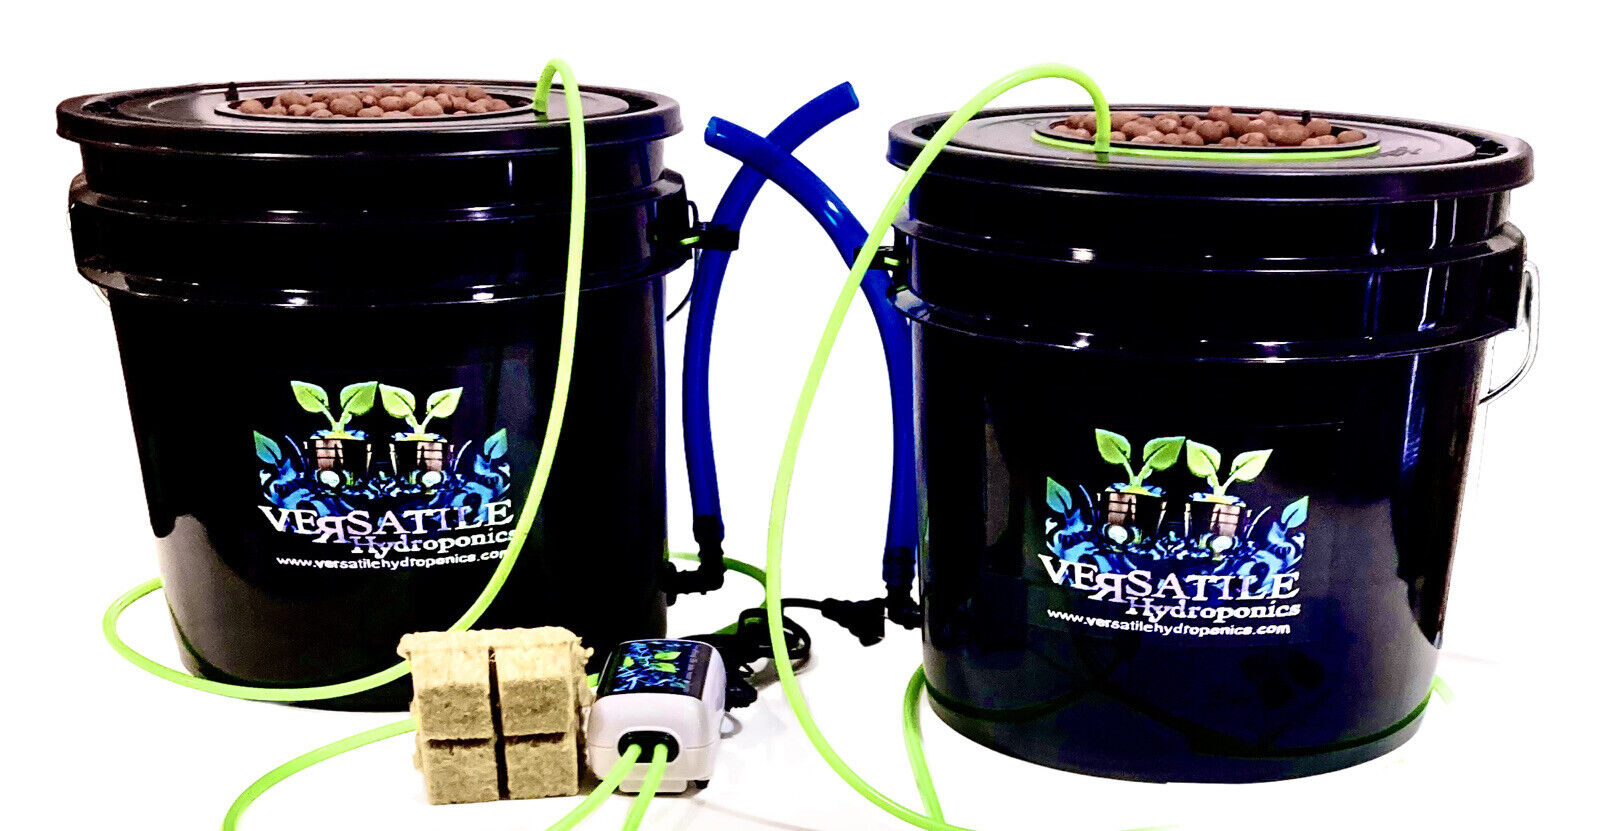 DWC hydroponic system Kit 3.5 G 2 Pk Indoor/outdoor, Stay Home And Grow Ur Own